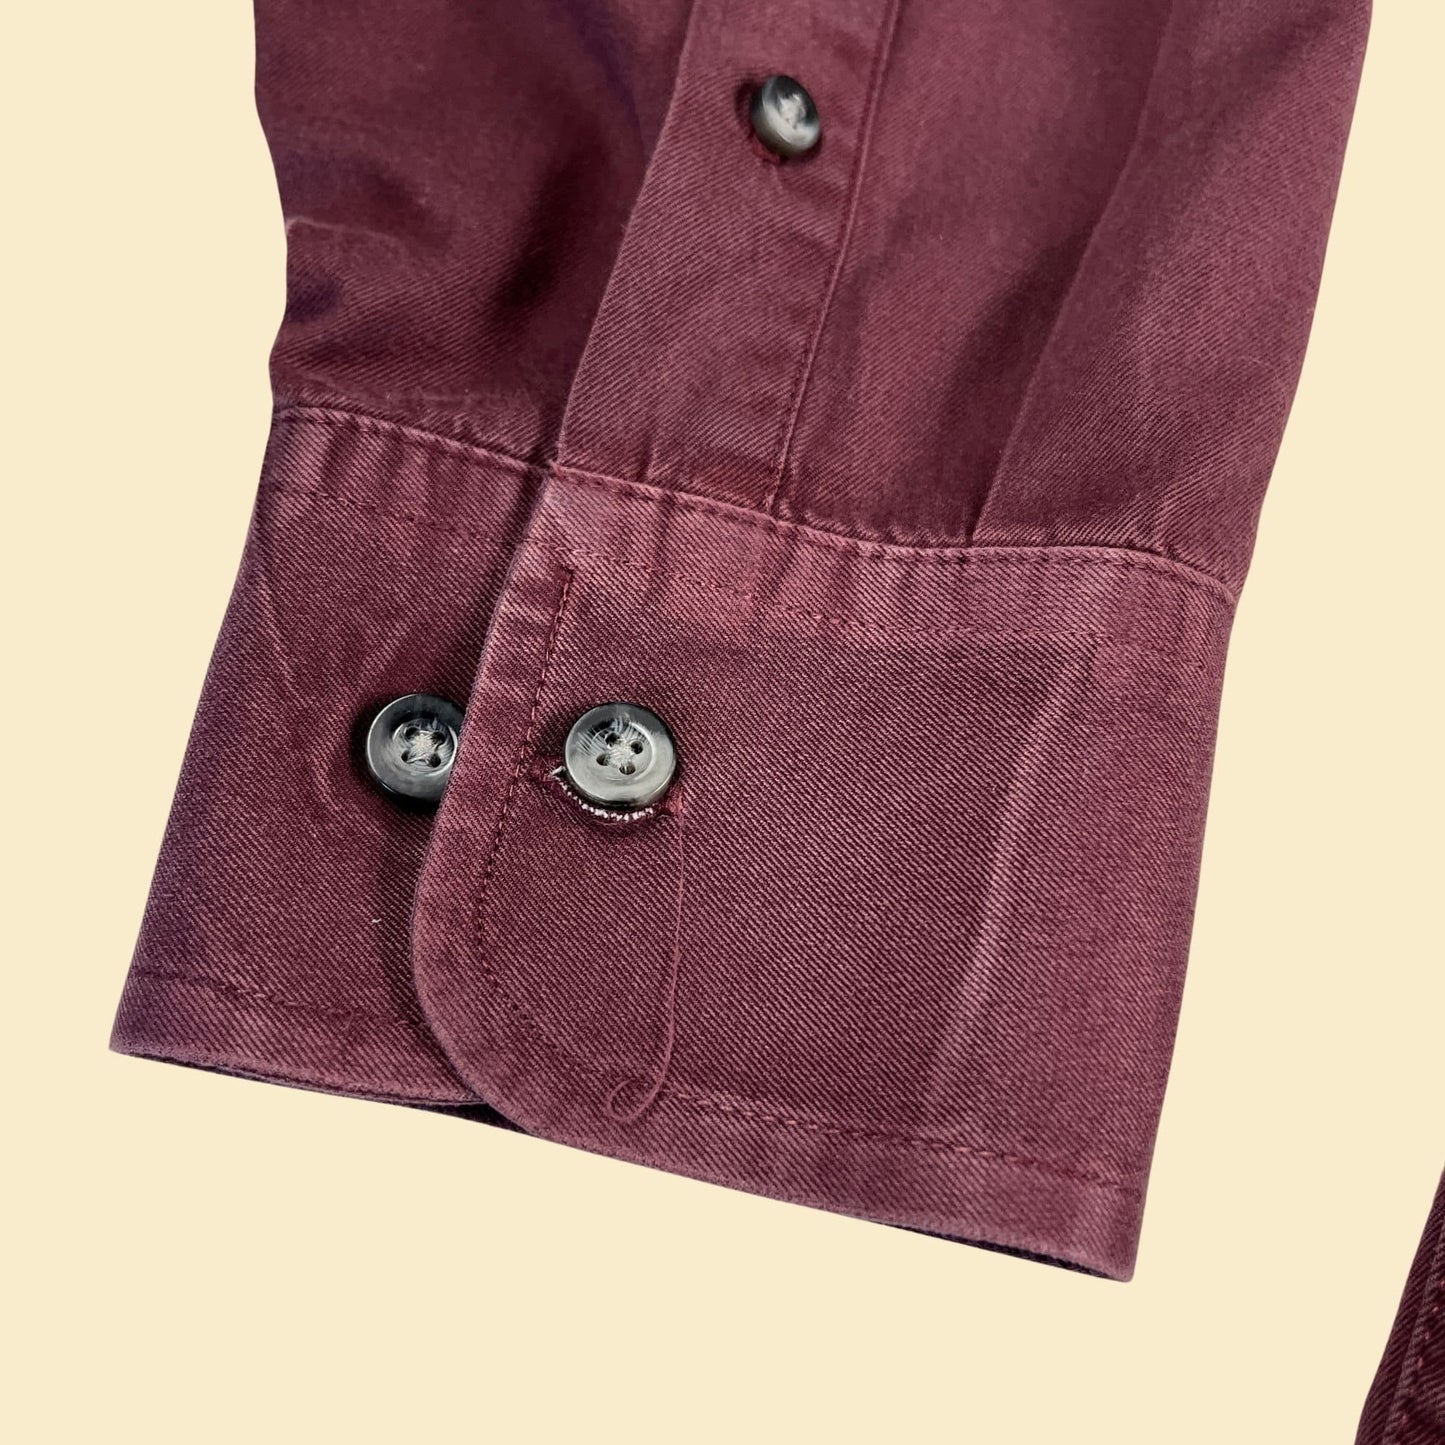 90s Wrangler & George Straight shirt, size L vintage burgundy red long sleeve men's button down